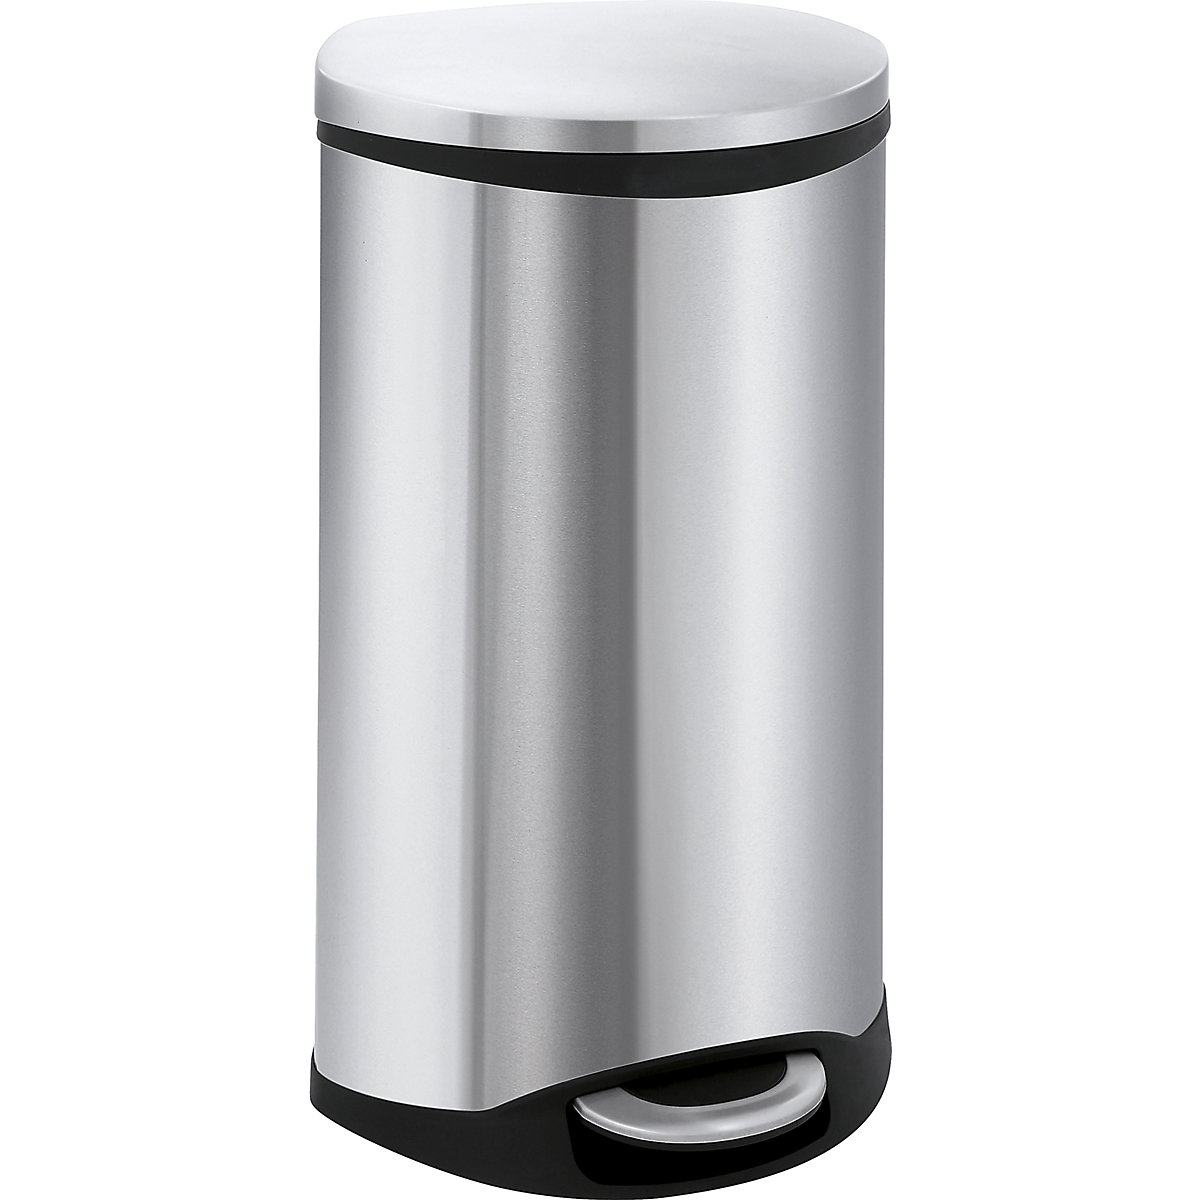 Waste collector with pedal, shell shape – EKO, capacity 30 l, HxWxD 690 x 340 x 375 mm, stainless steel body-4